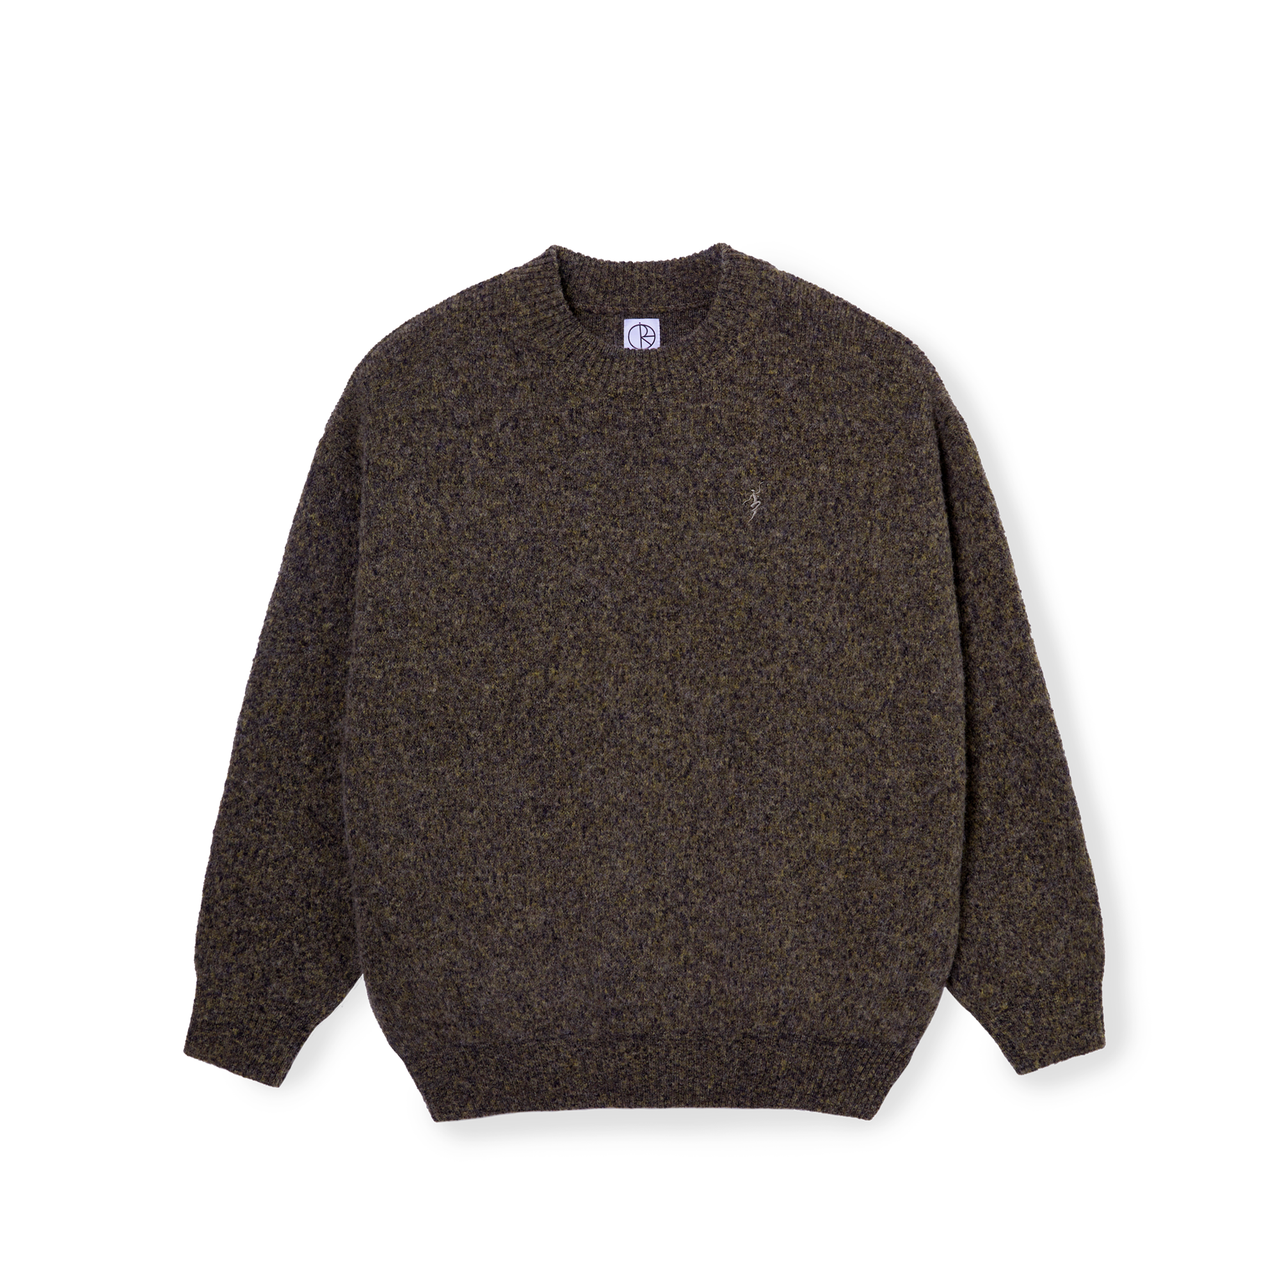 No Comply Knit Sweater - Brown – Polar Skate Co.